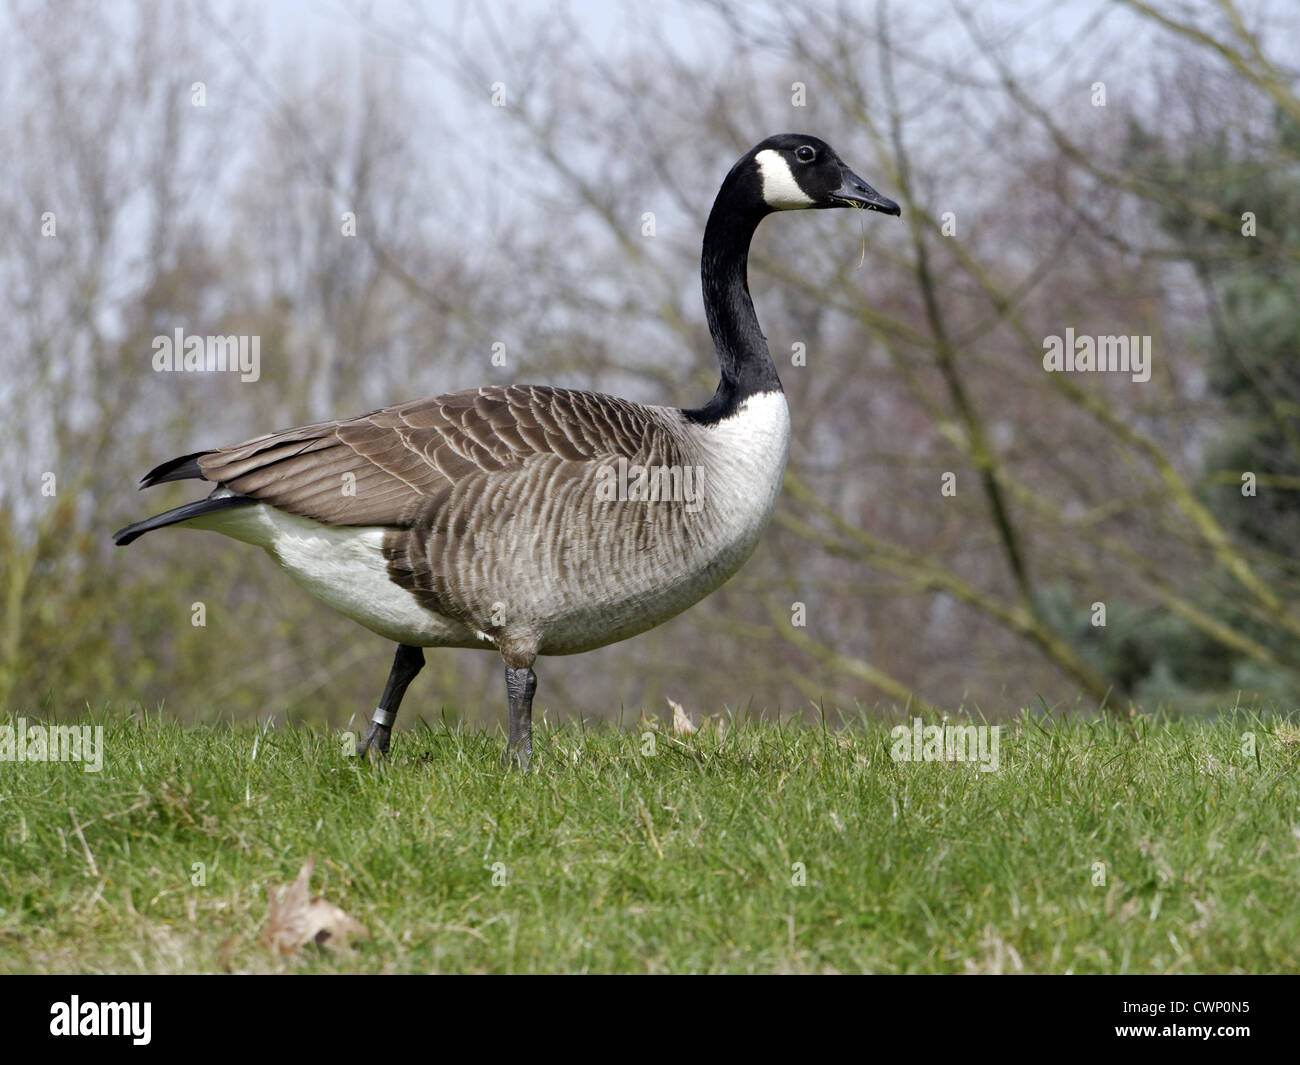 Canada Goose (Branta canadensis) introduced species, adult, walking on grass, Warwickshire, England, march Stock Photo